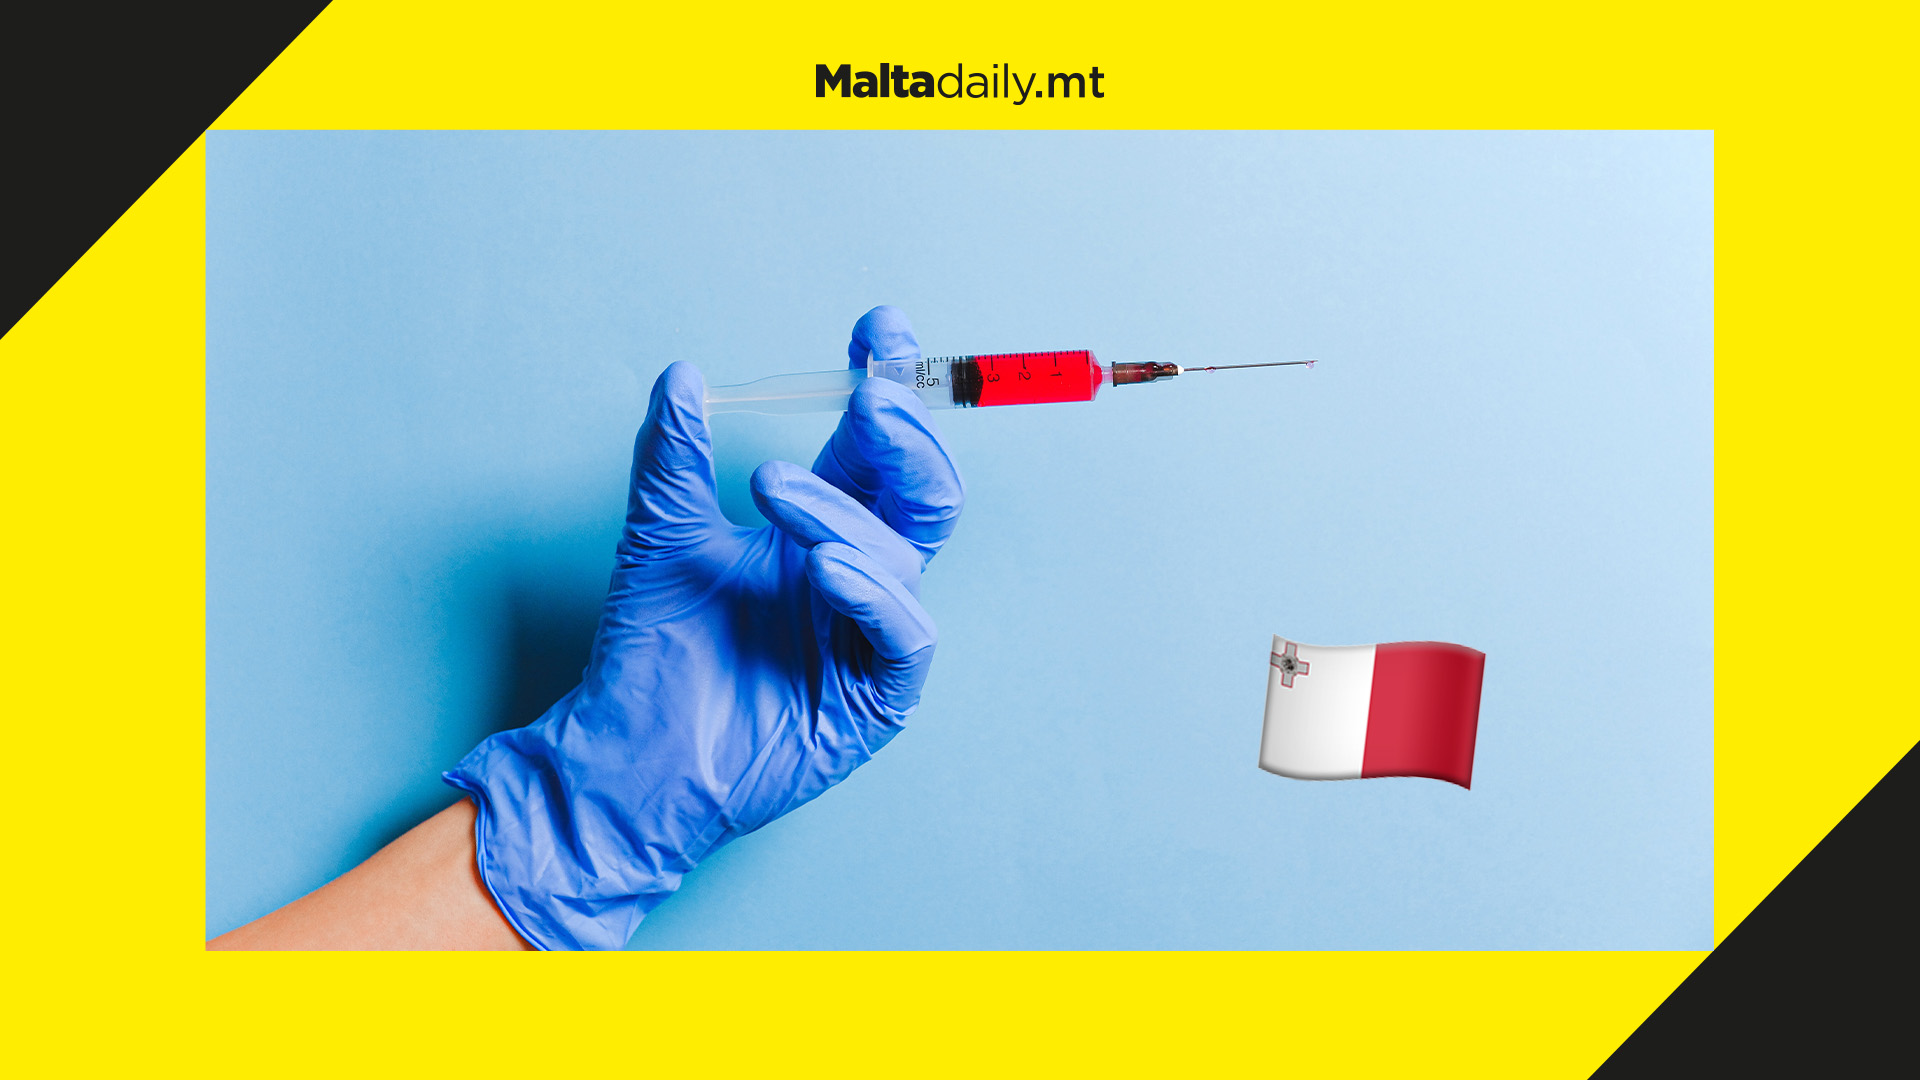 61% of Malta believes getting a COVID-19 vaccine is still a civic duty